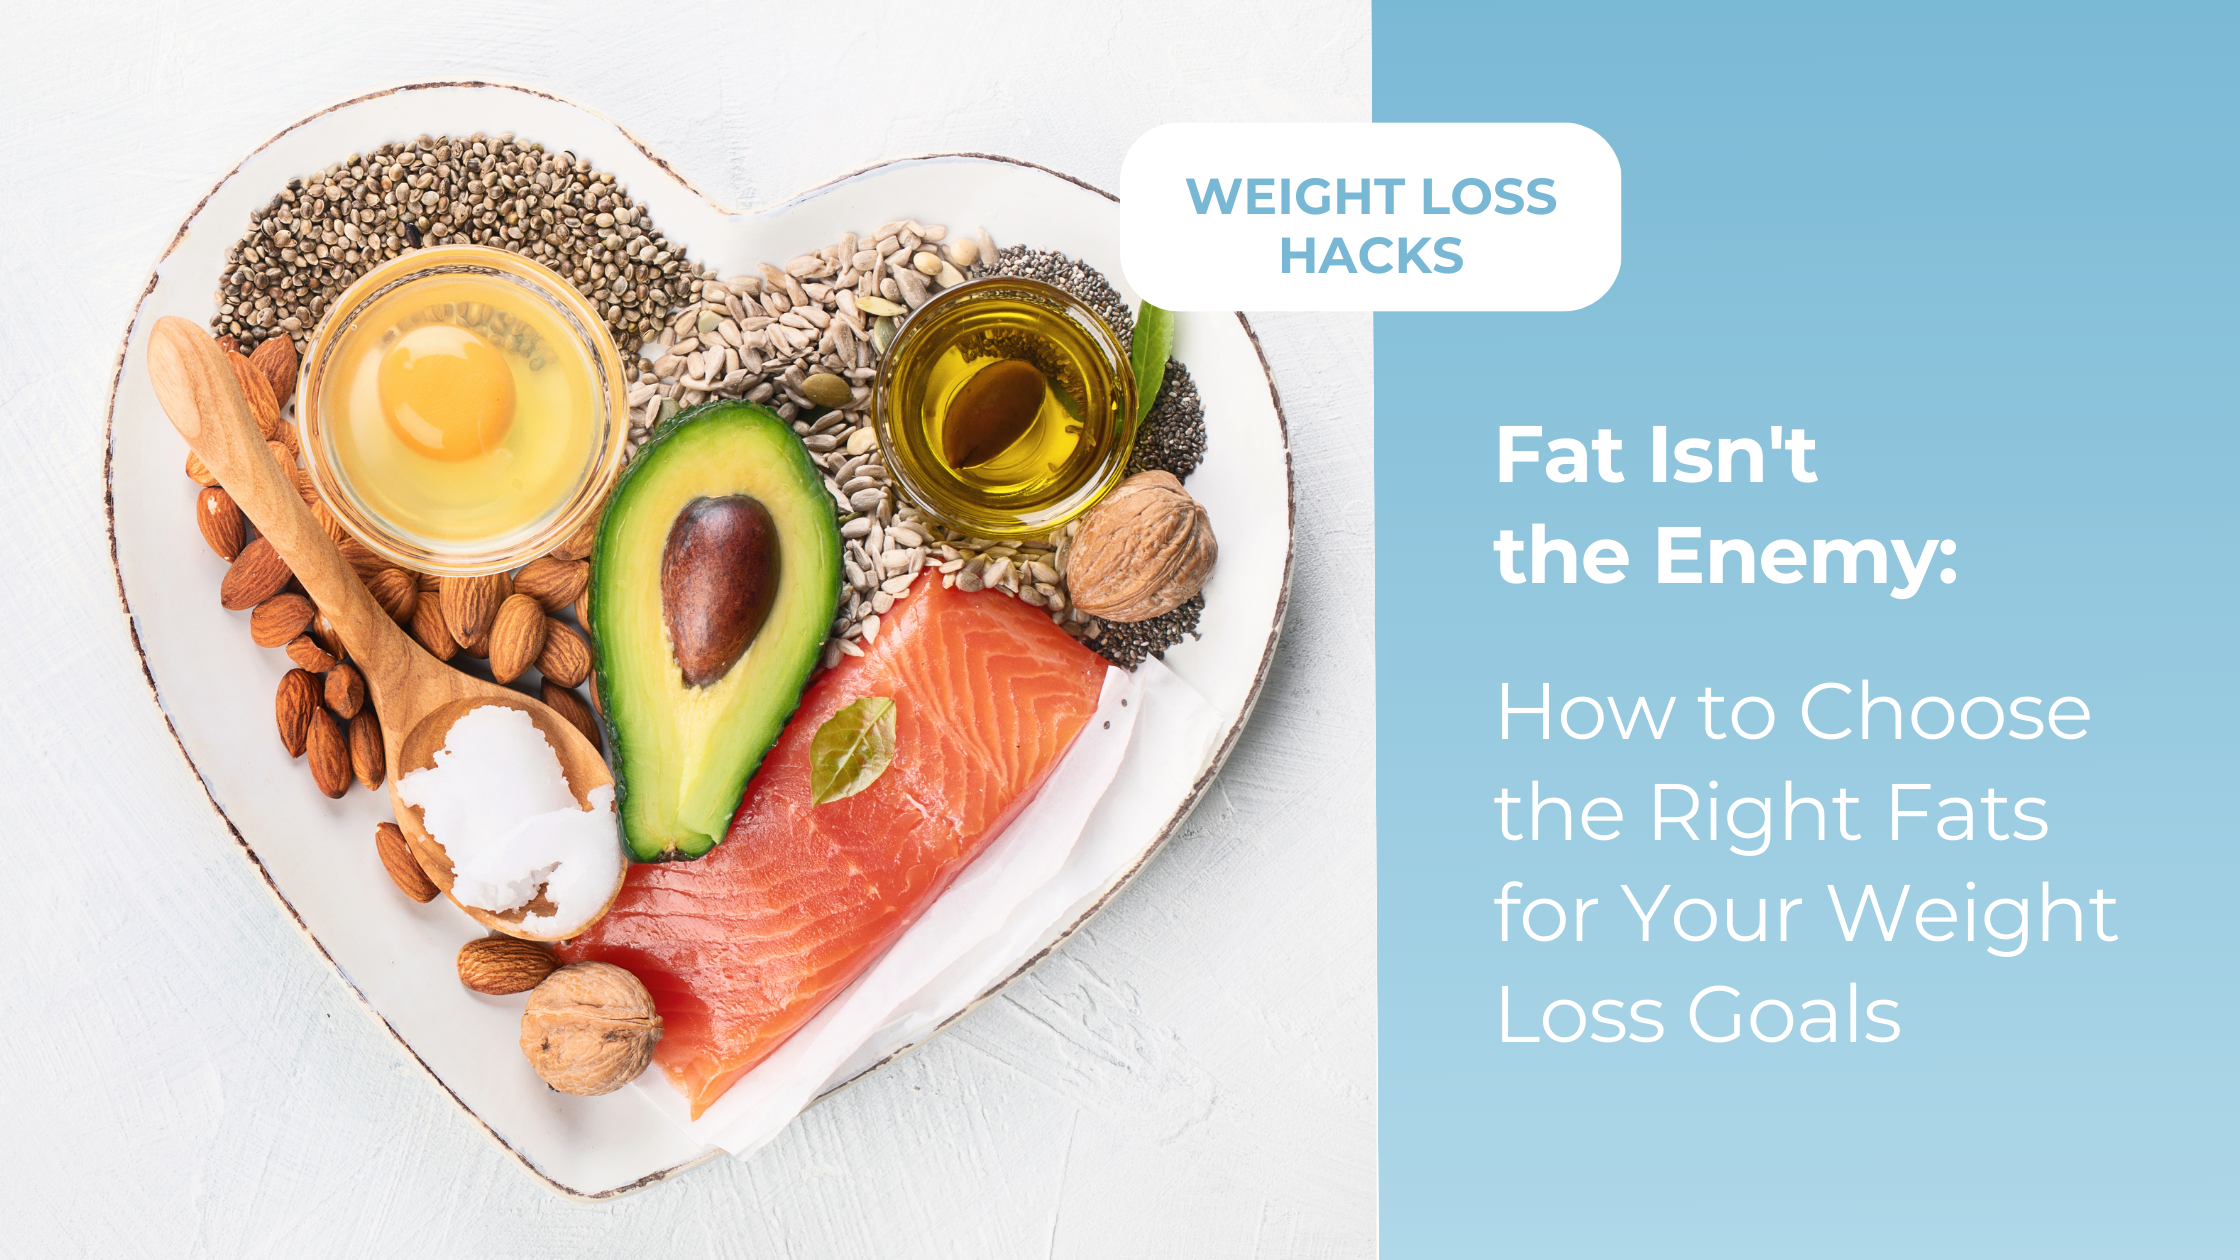 Fats and weight management